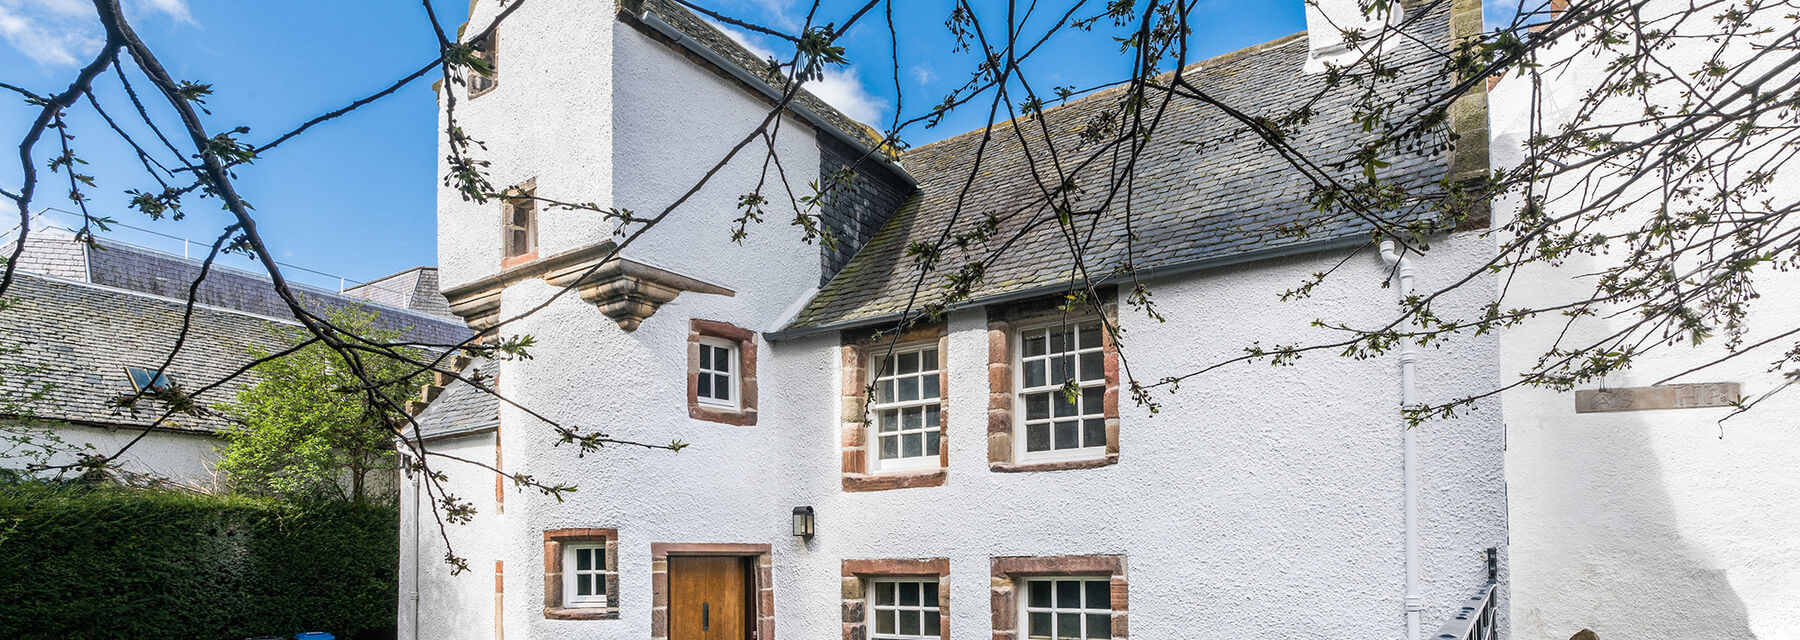 An old white townhouse with a grey slate roof and a wooden door.